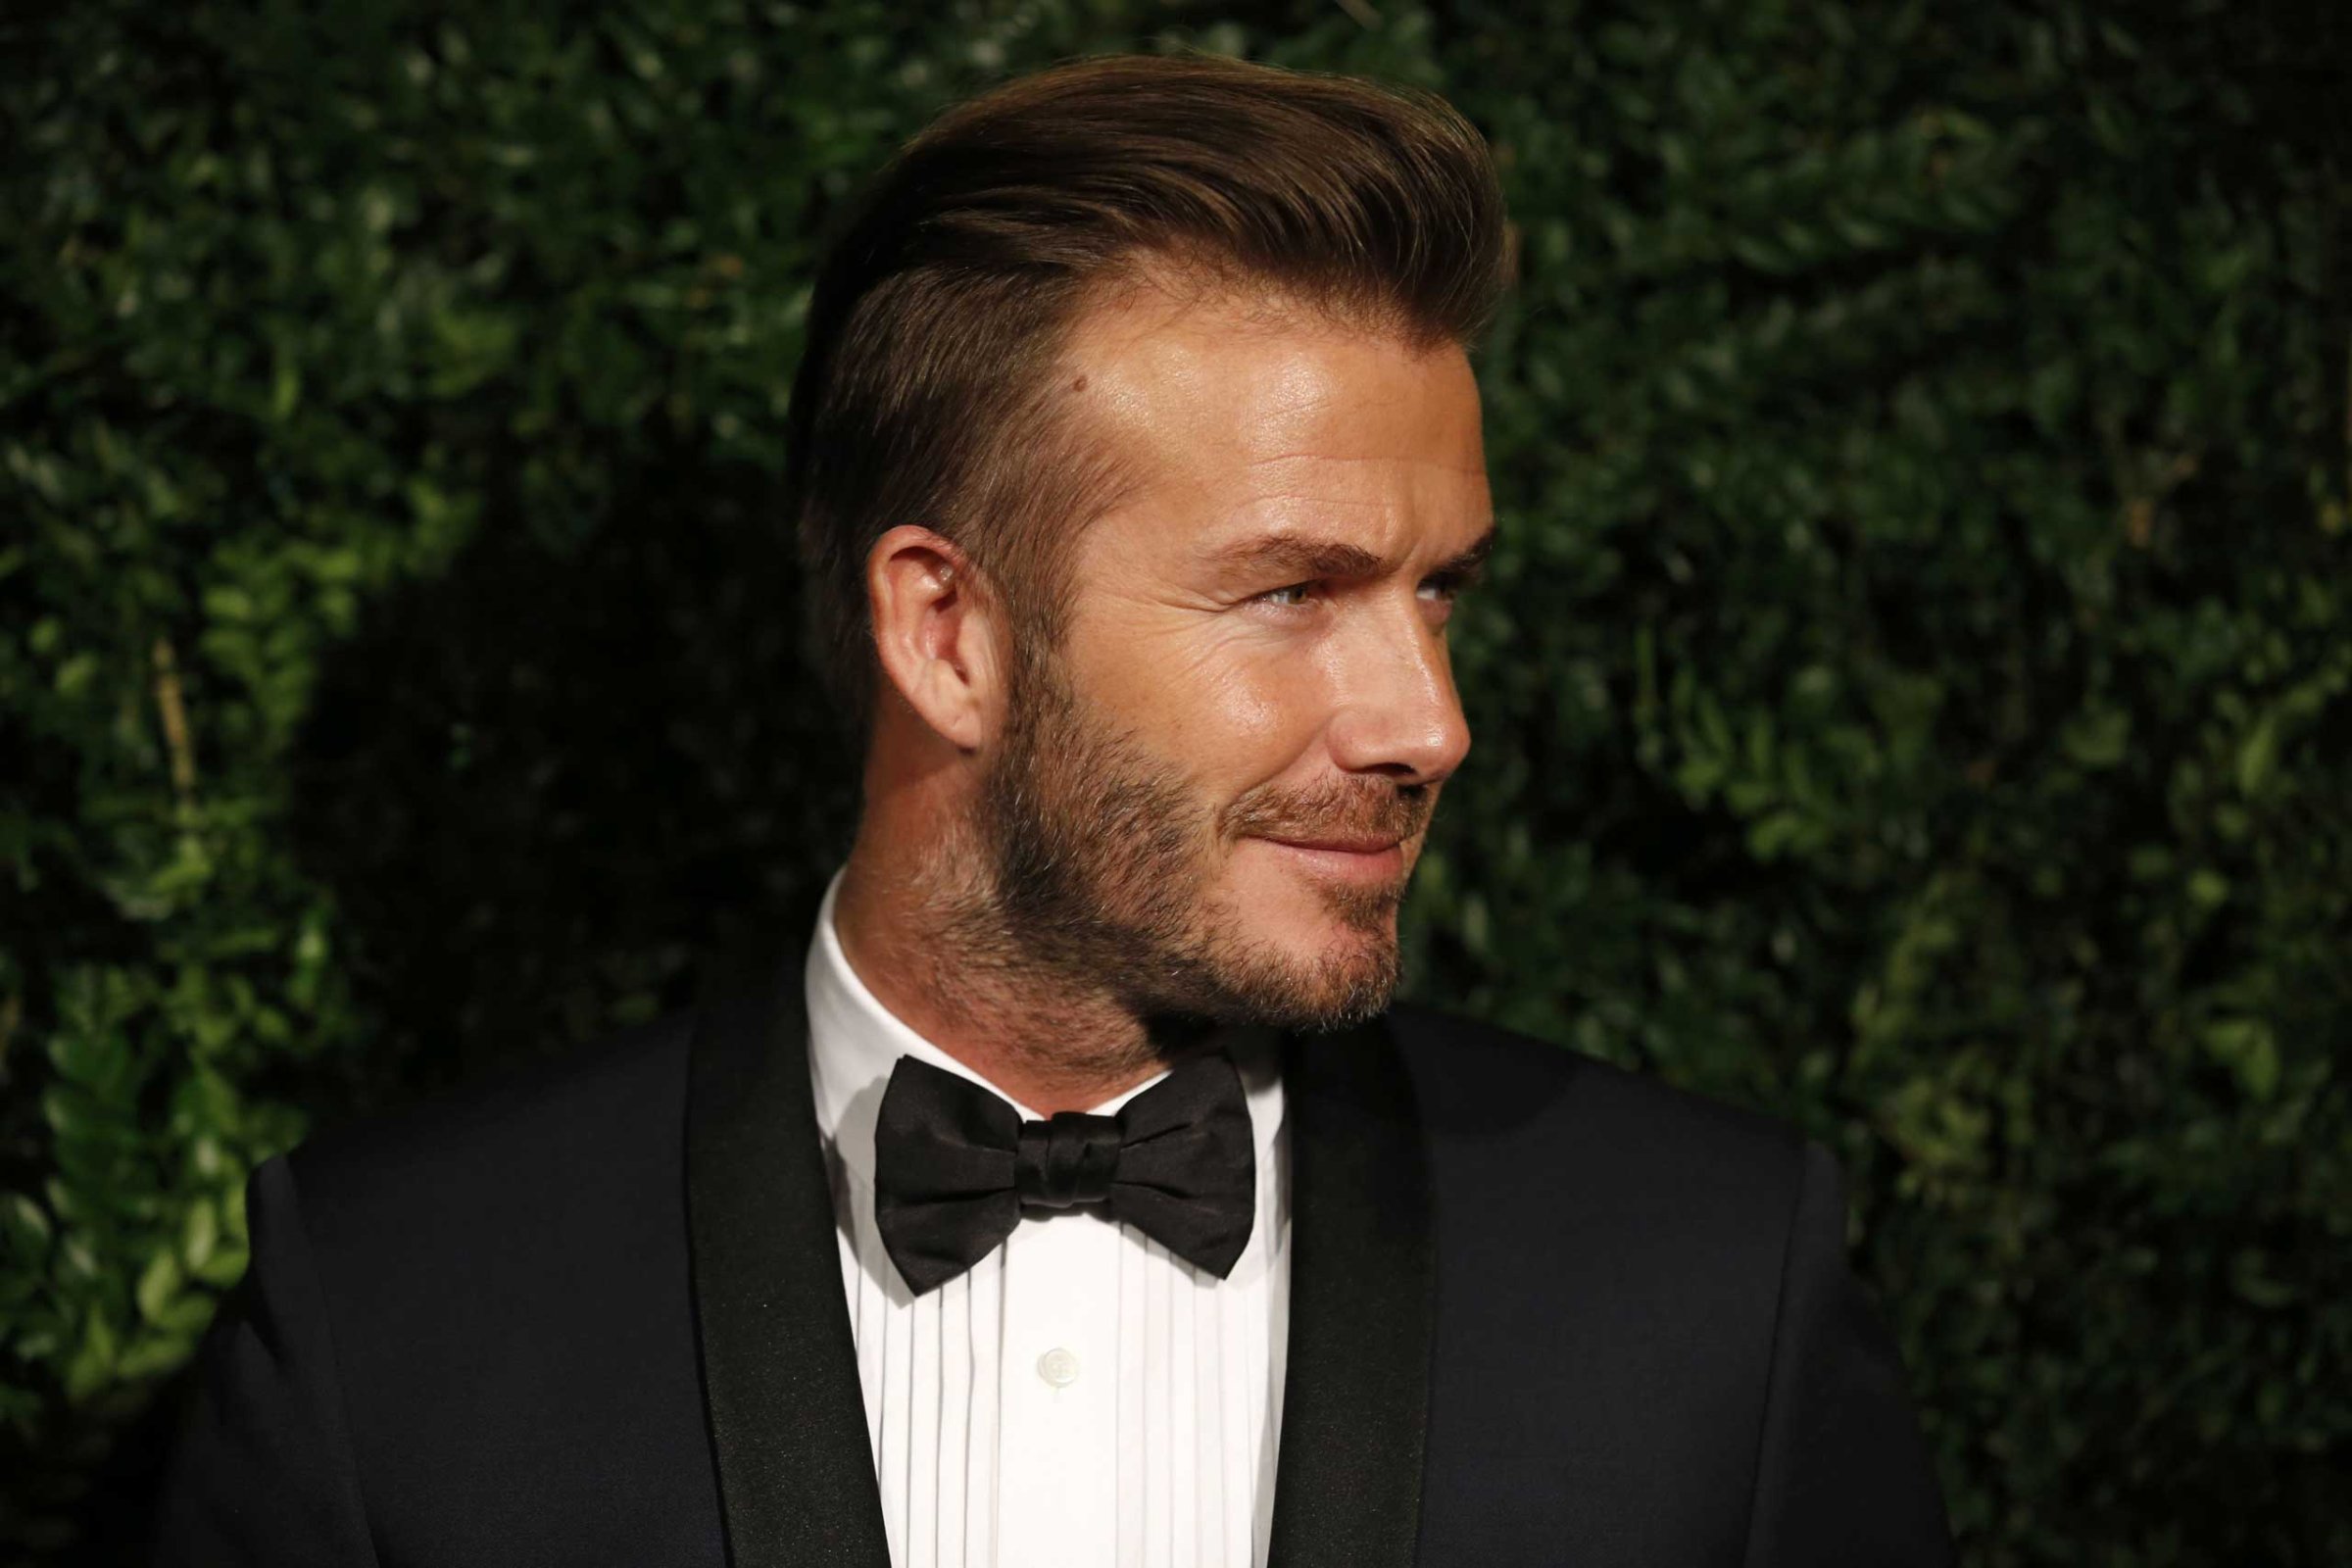 David Beckham poses on the red carpet as he attends the 60th London Evening Standard Theatre Awards 2014 in London on Nov. 30, 2014.